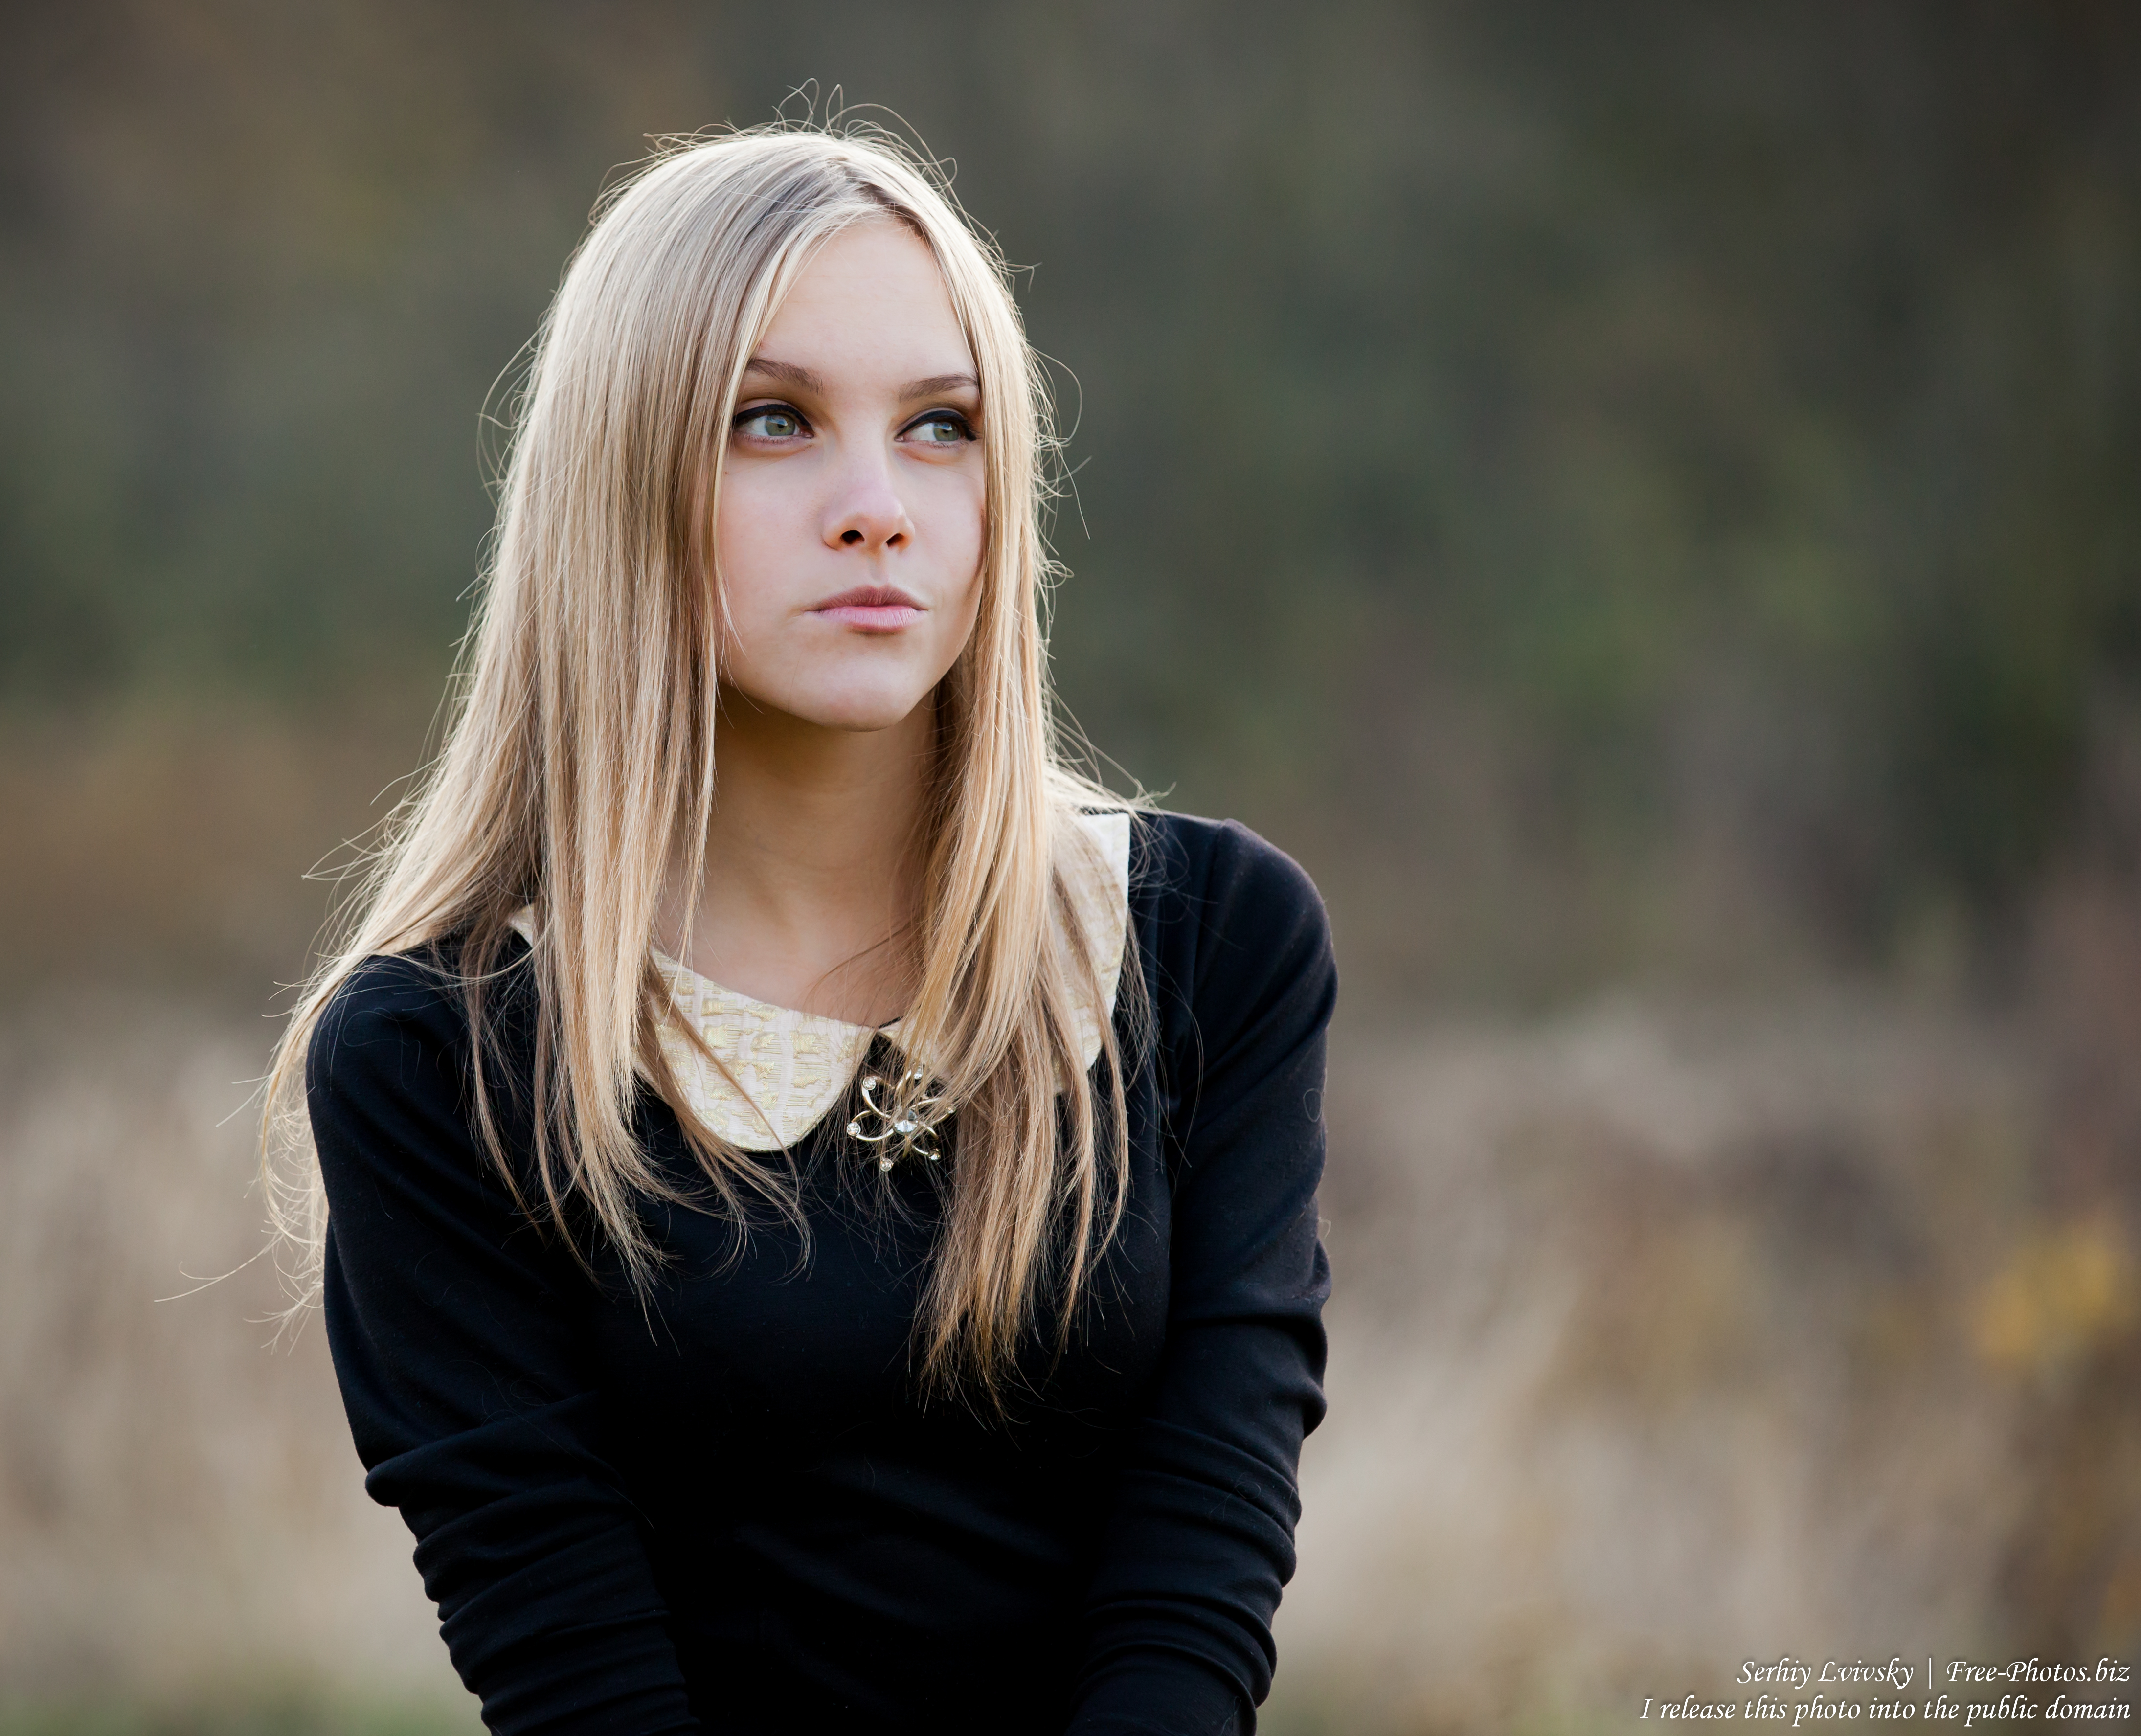 a 15-year-old blond girl photographed in October 2015 by Serhiy Lvivsky, picture 9